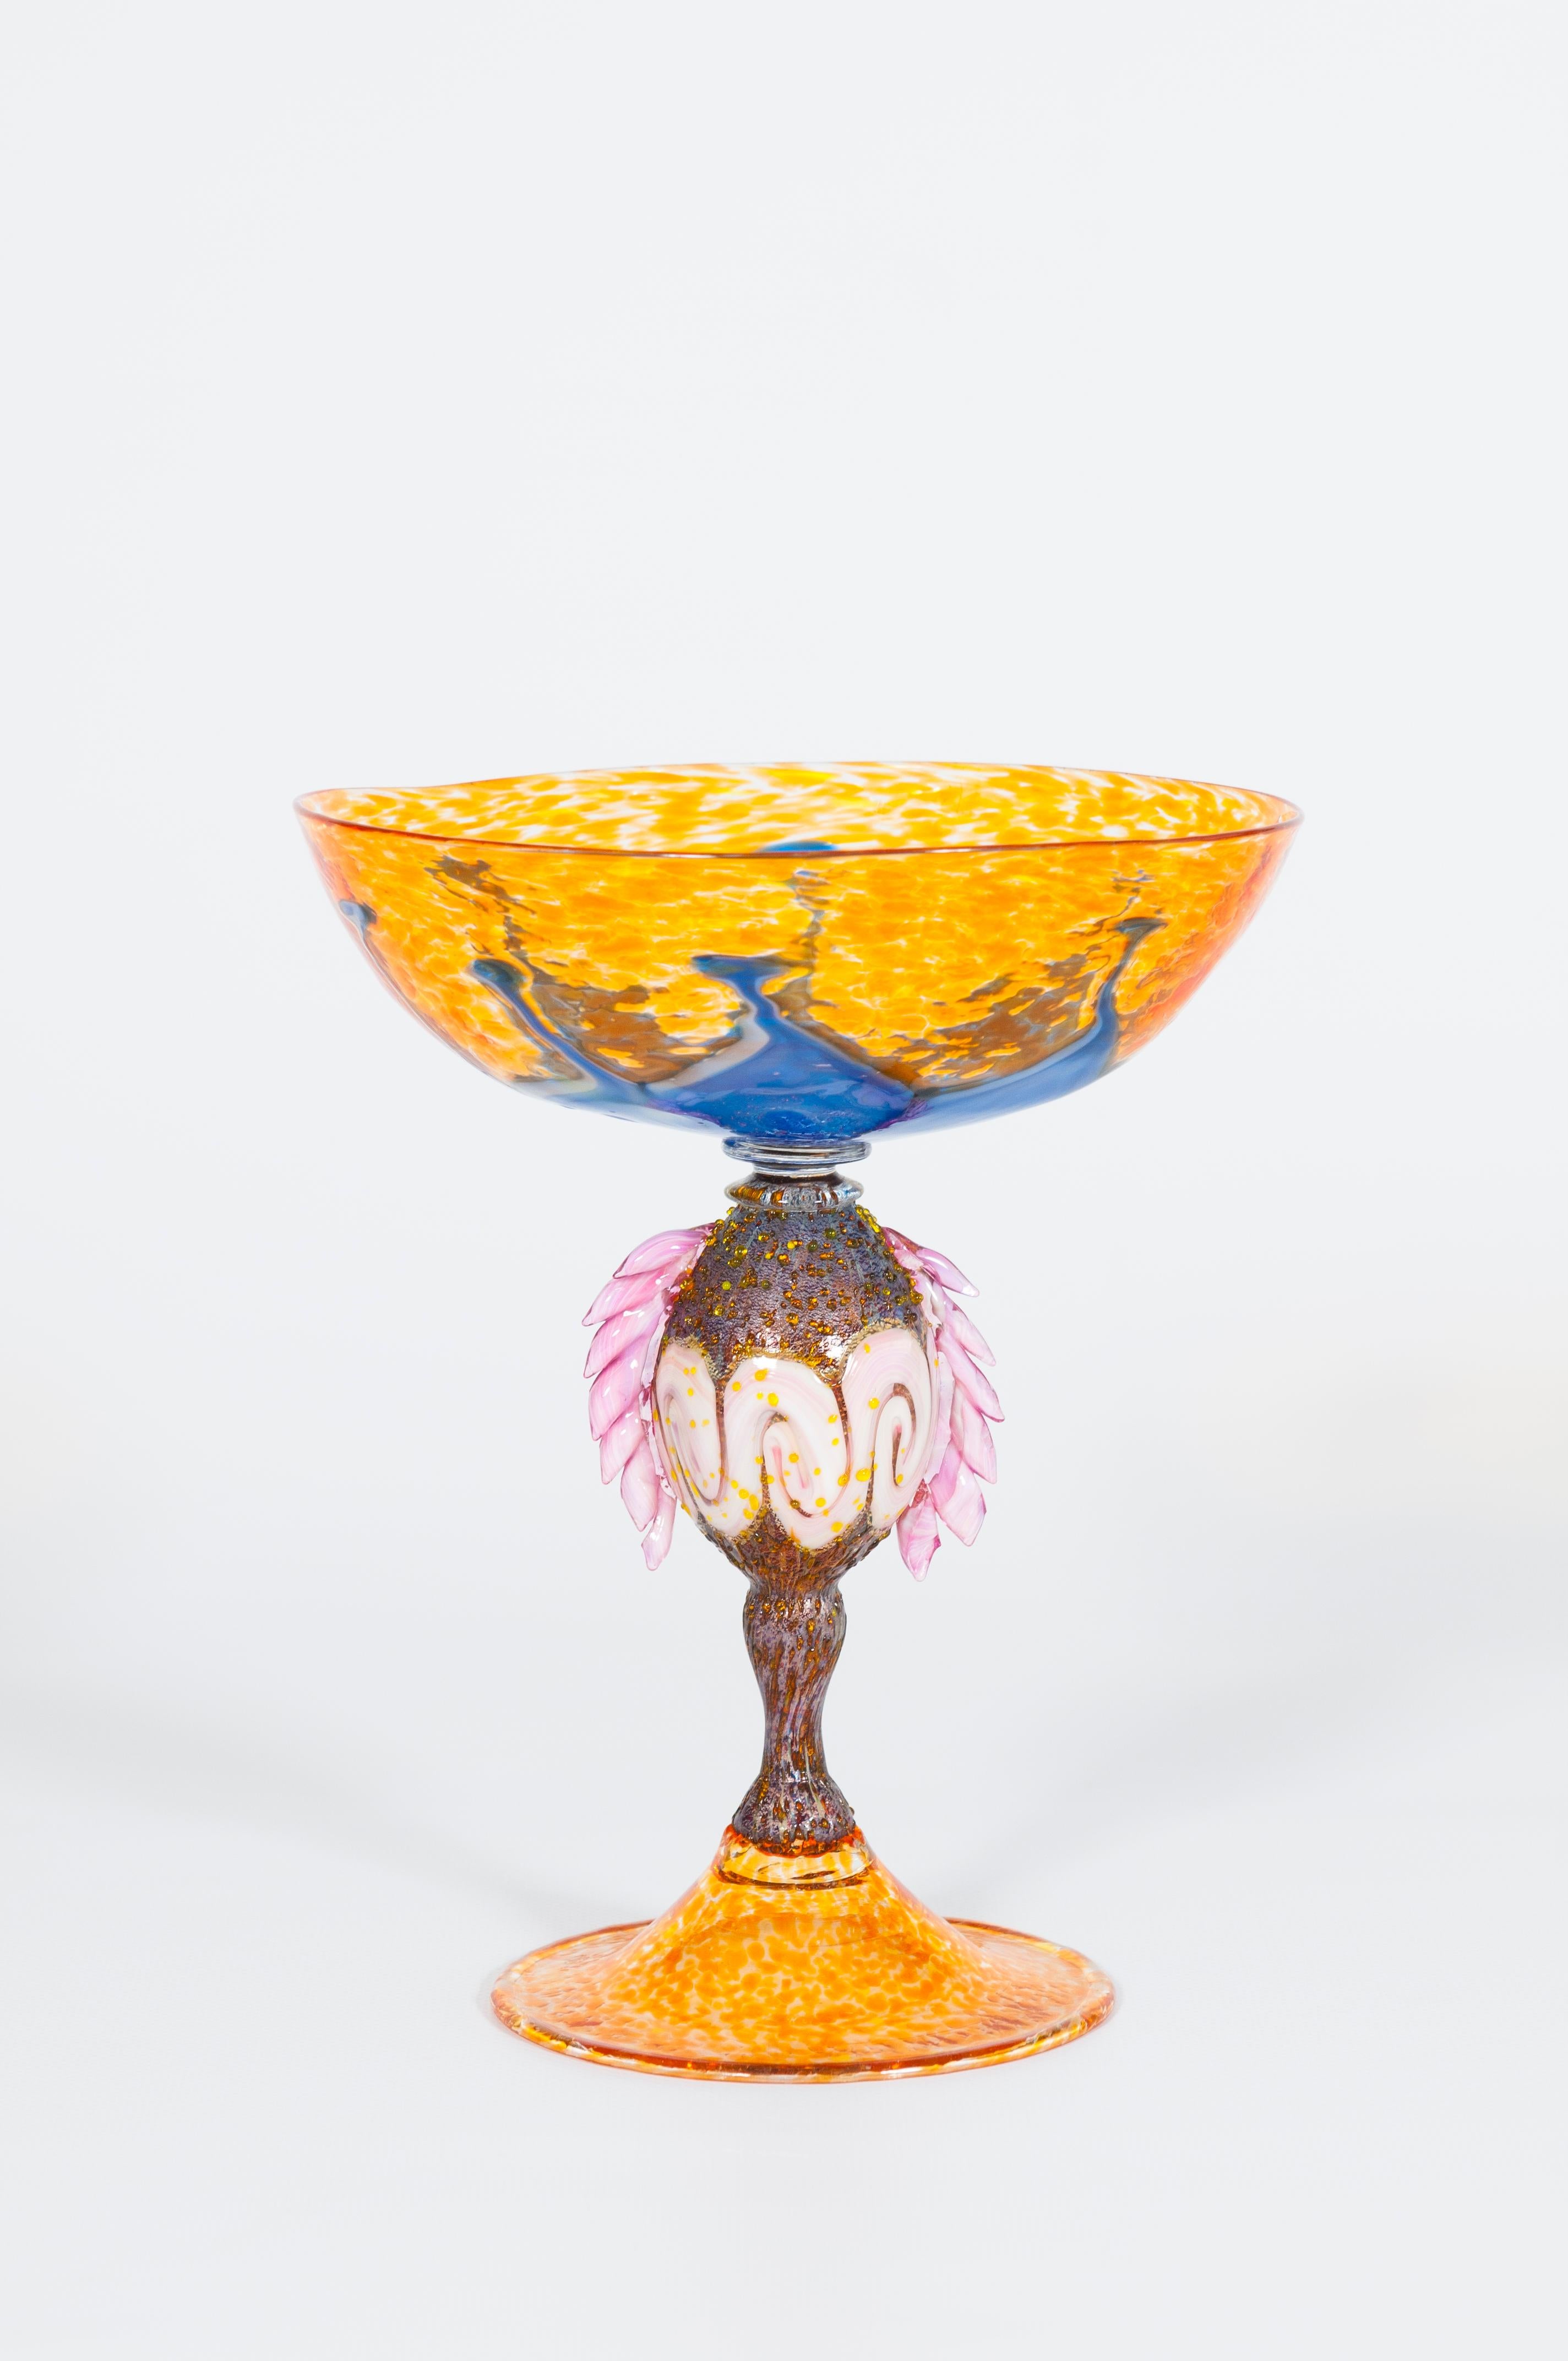 Italian Venetian Multicolor Murano glass goblet with Morise 1980s Handcrafted.
This unique Venetian goblet is a refined piece of art that stands out for its beauty, and for the richness and vividness of its colors. It was entirely handcrafted in